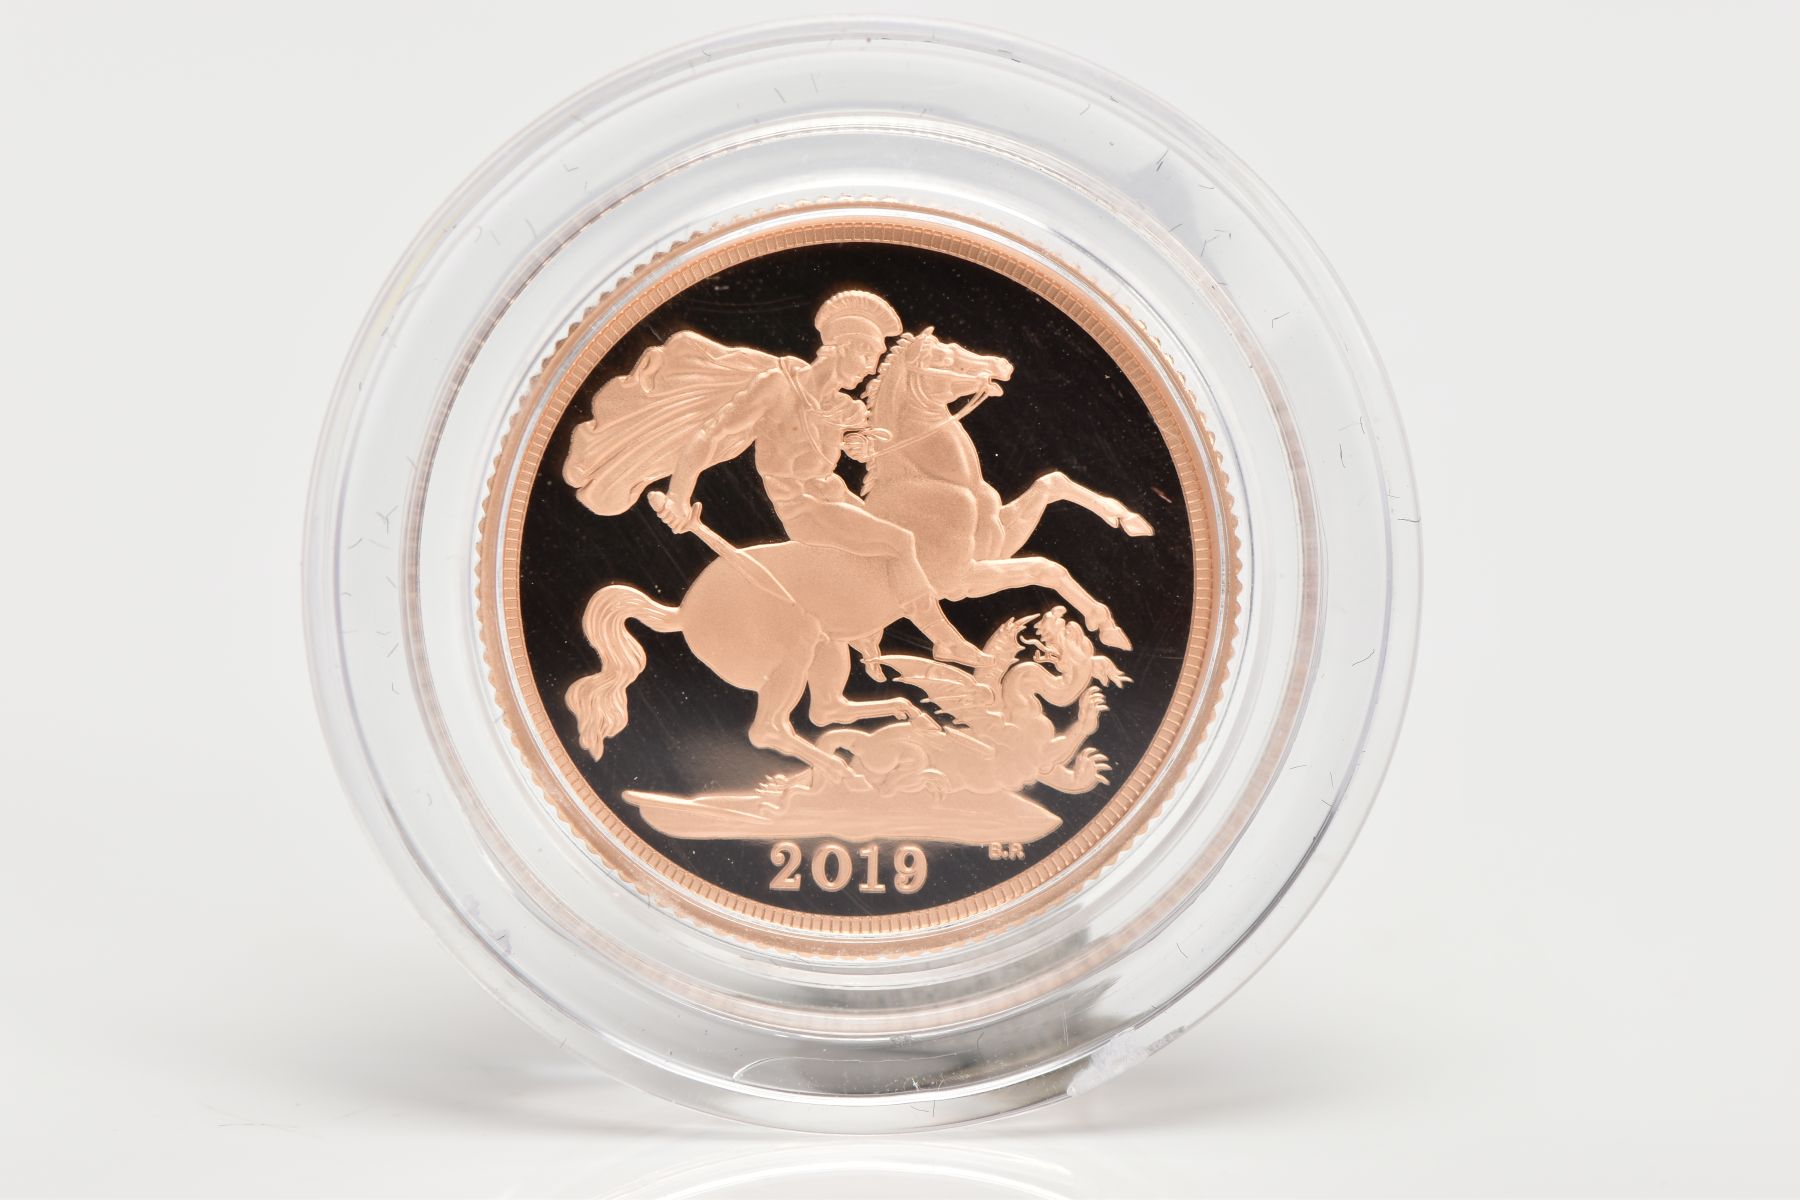 A ROYAL MINT BOXED WITH A C.O.A. 2019 GOLD PROOF SOVEREIGN including a sovereign booklet - Image 2 of 3